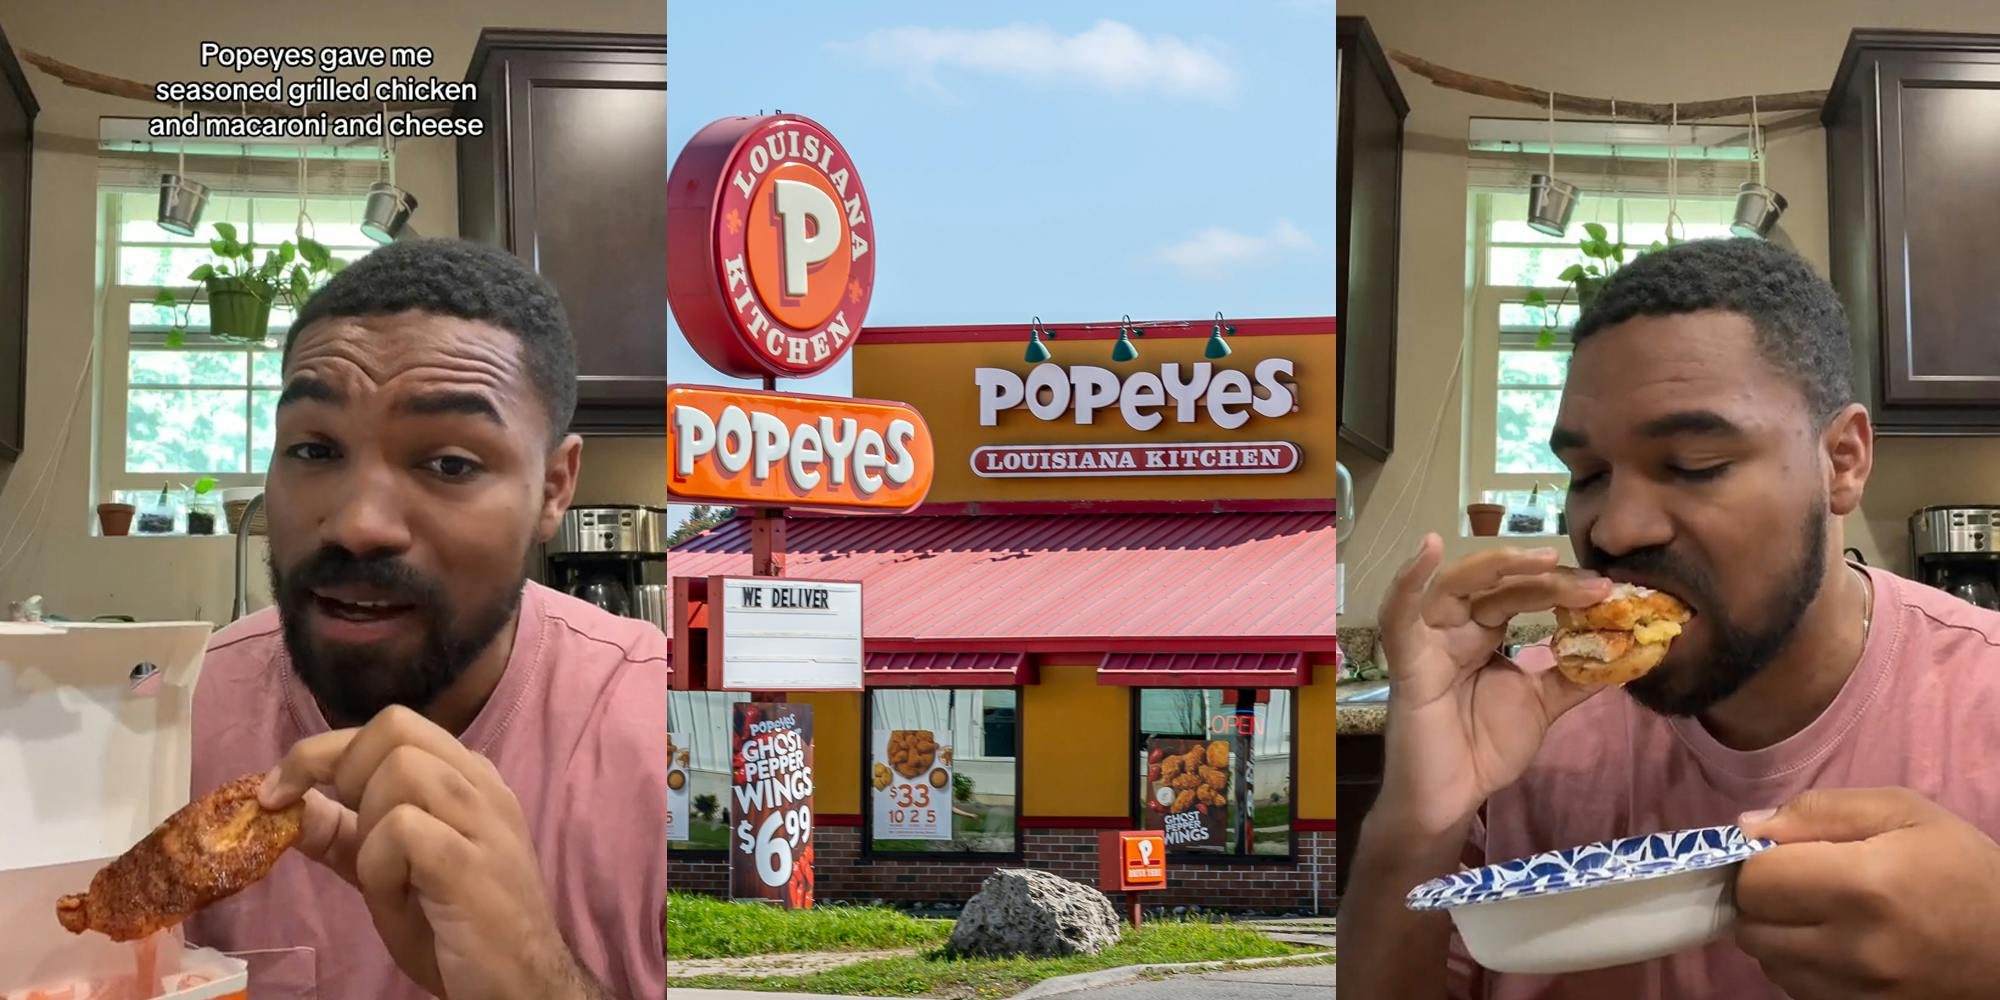 'My life is changed': Popeyes customer shares strawberry biscuit hack